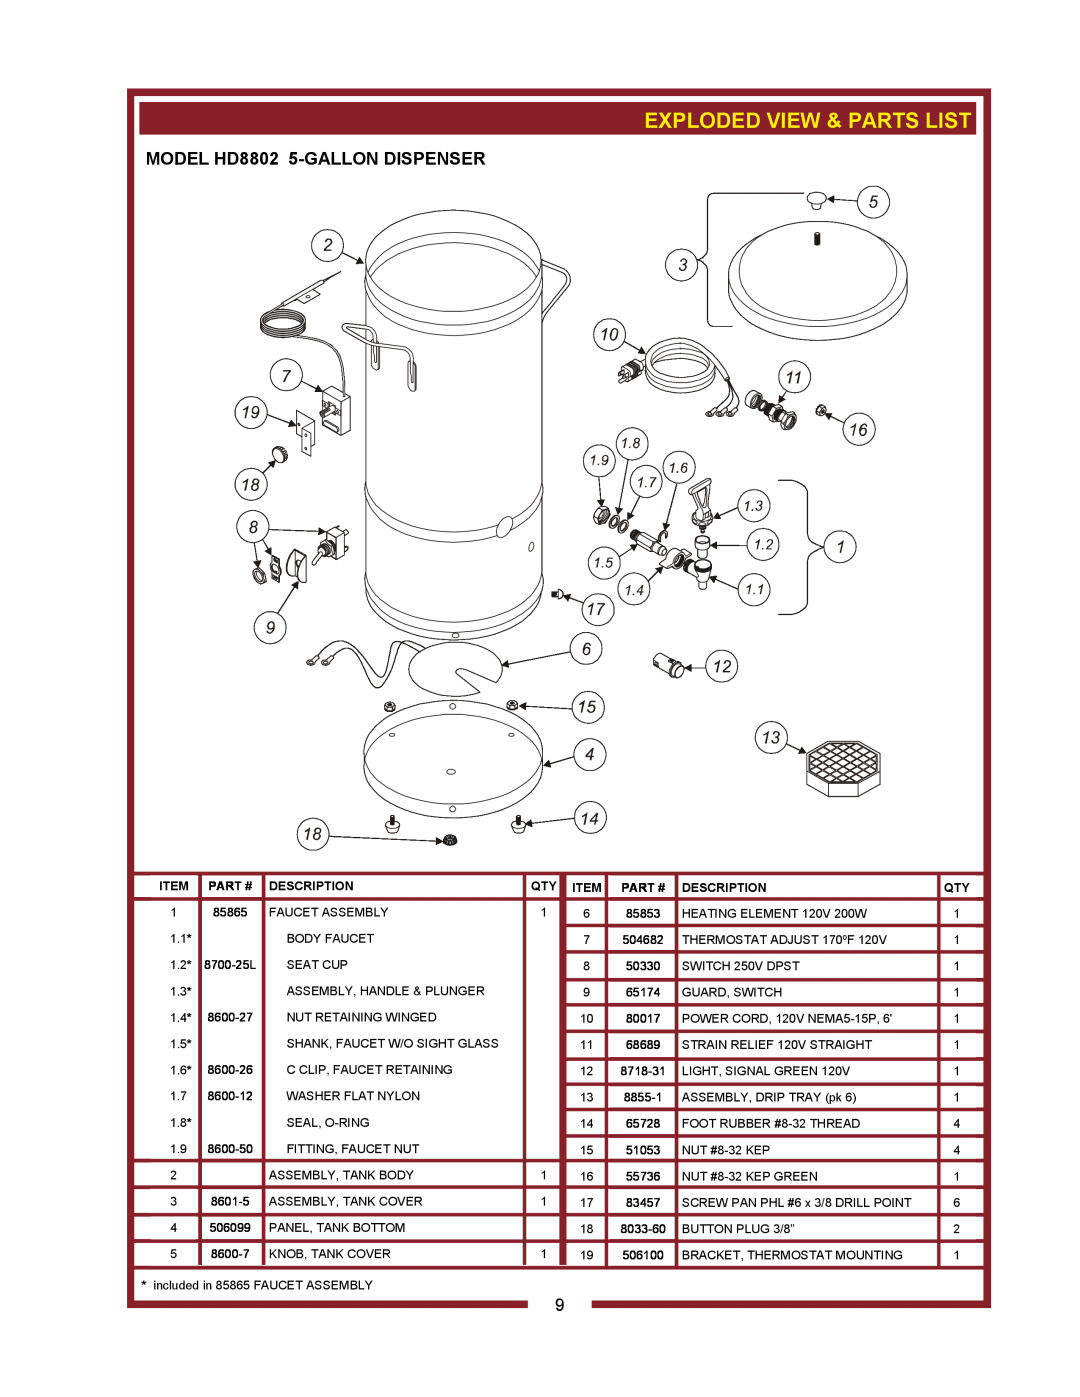 Bloomfield HD8802, HD8799 owner manual Exploded View & Parts List, Part #, Description 